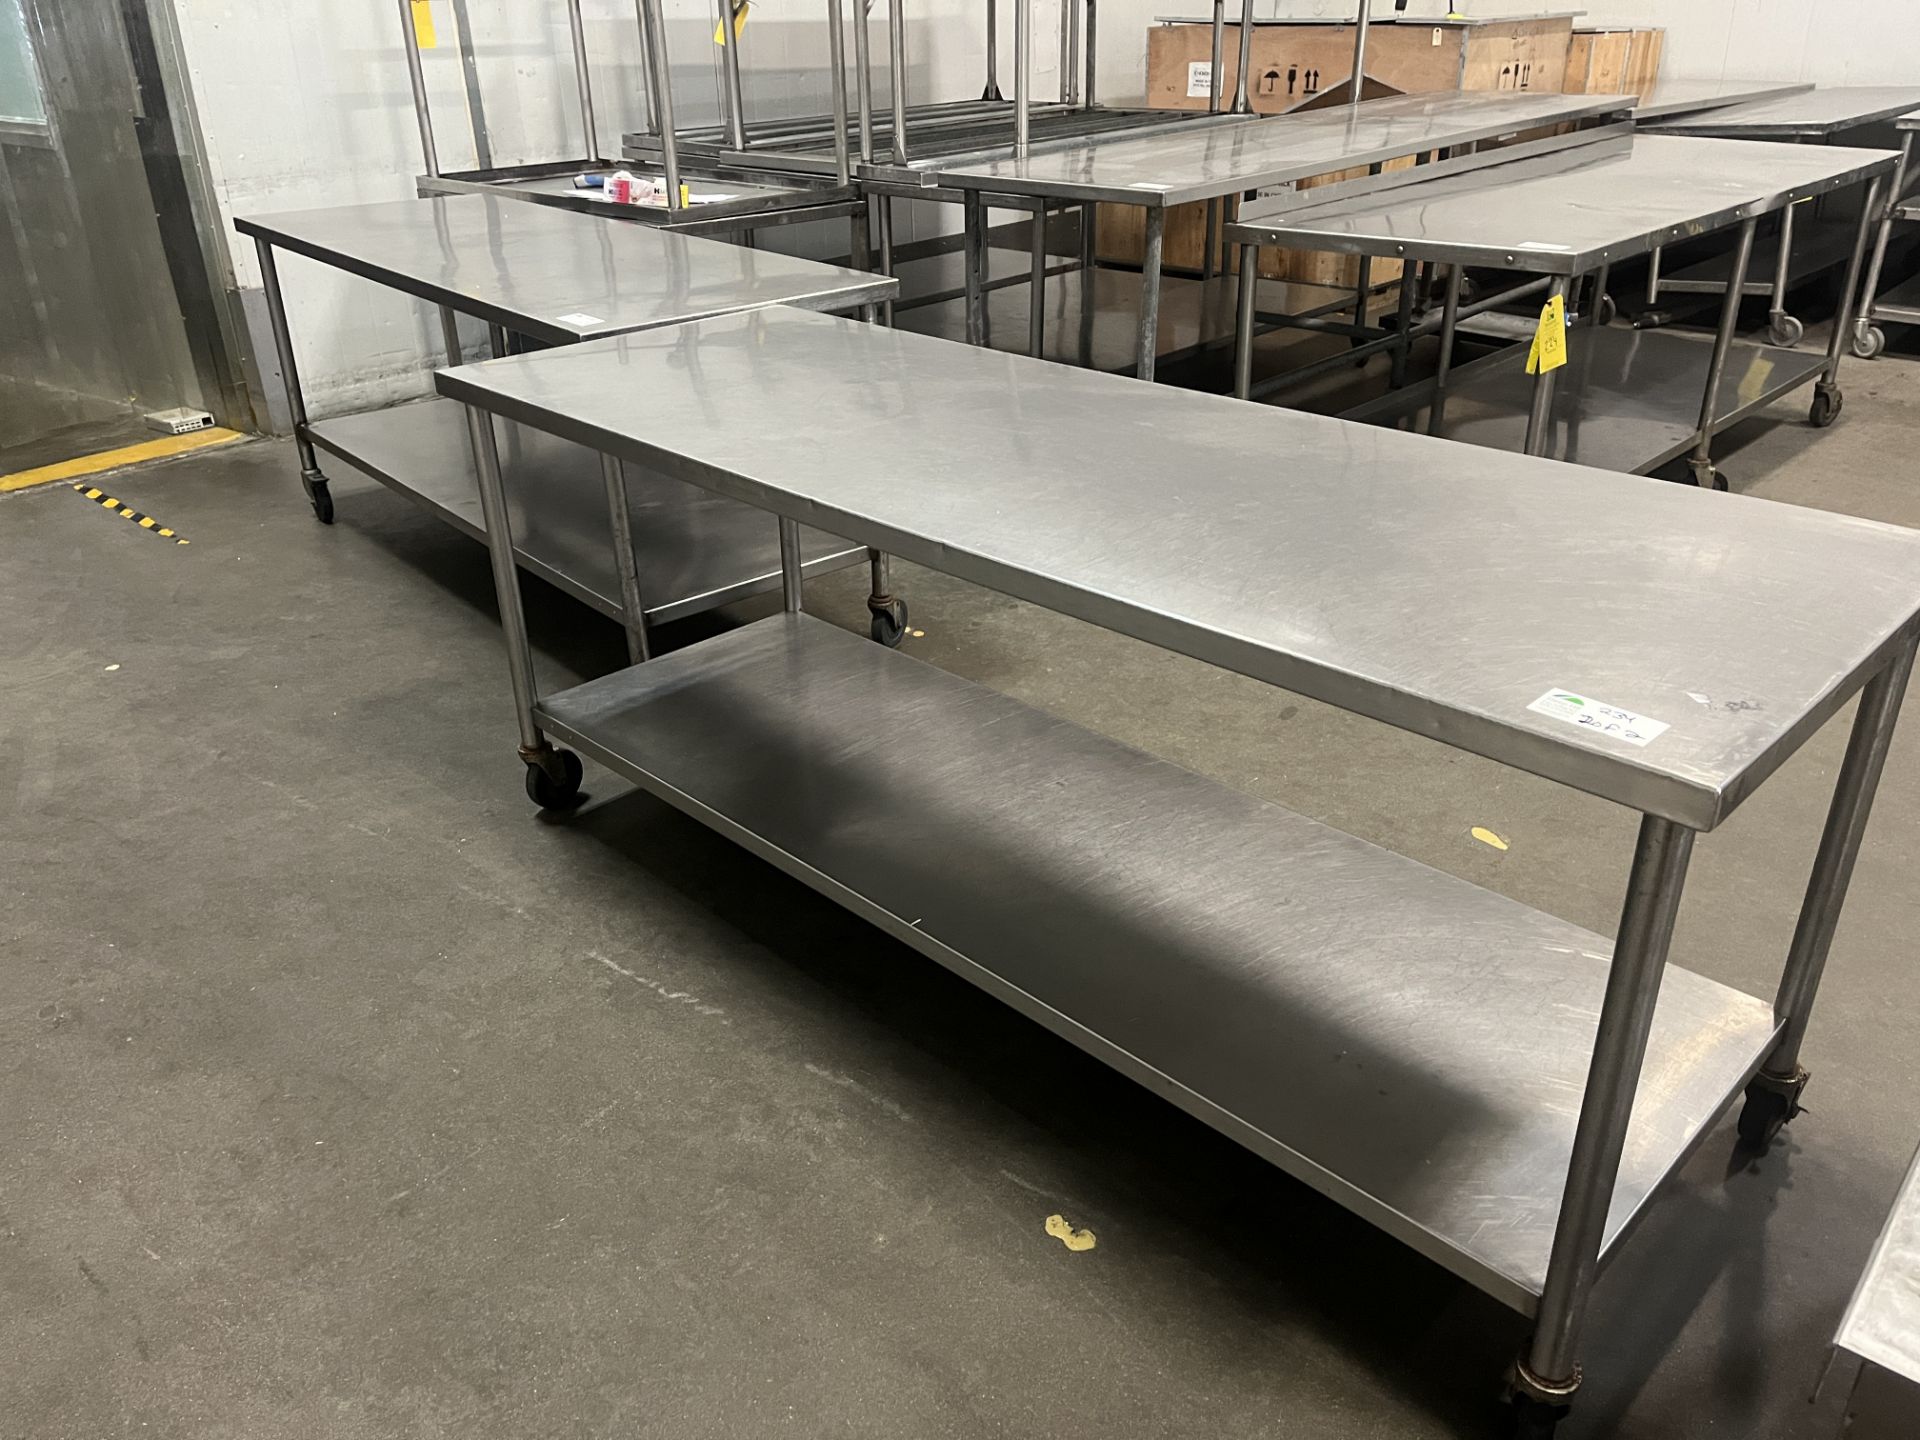 Lot of 2 7ft Long SS Tables Each, Dimensions LxWxH: 84x30x35